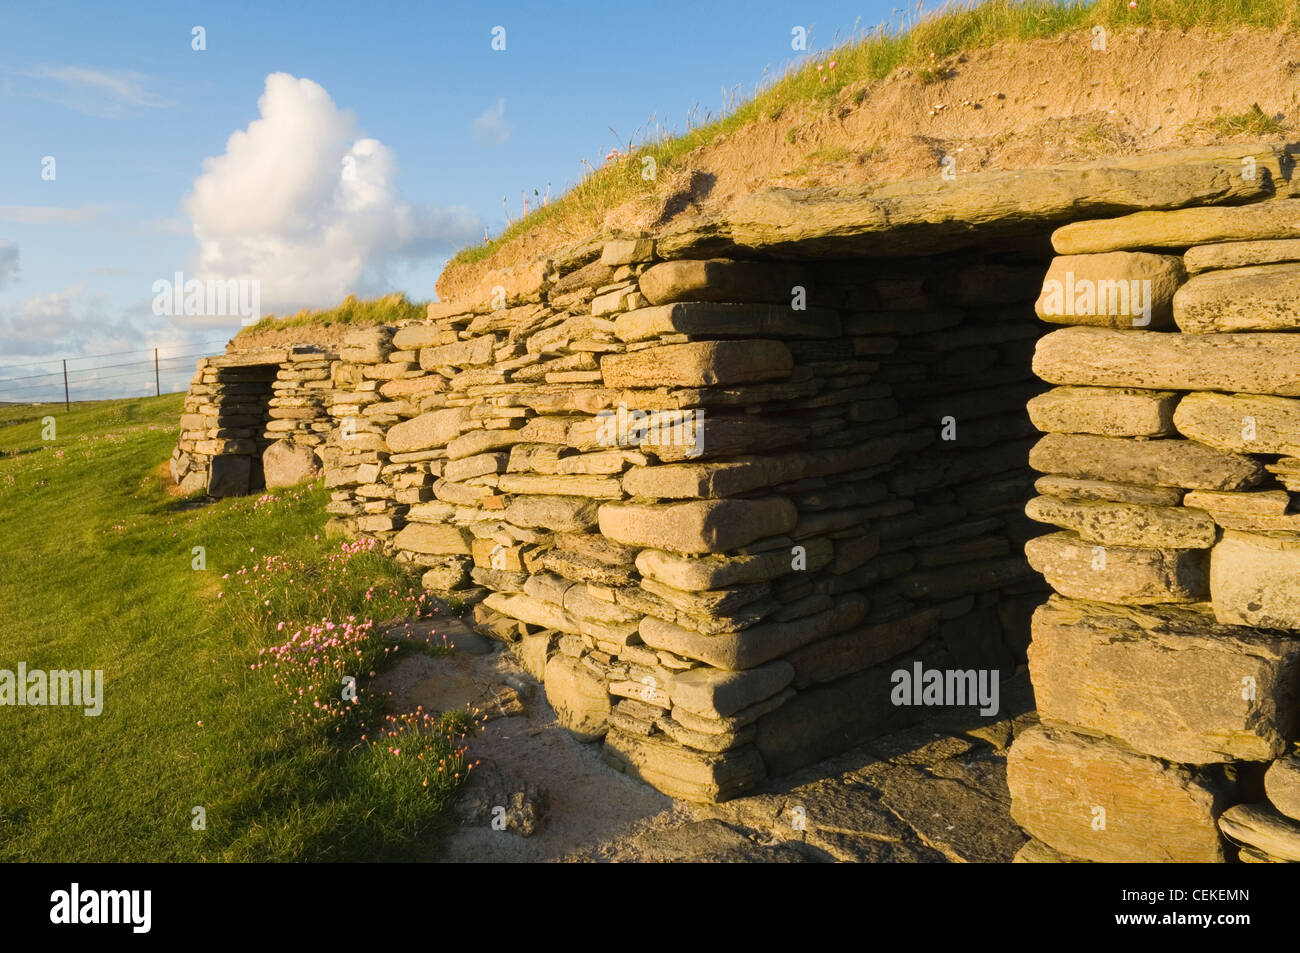 The Knap of Howar, a preserved neolithic farmstead on the island of Papa Westray in the Orkney Islands, Scotland. Stock Photo